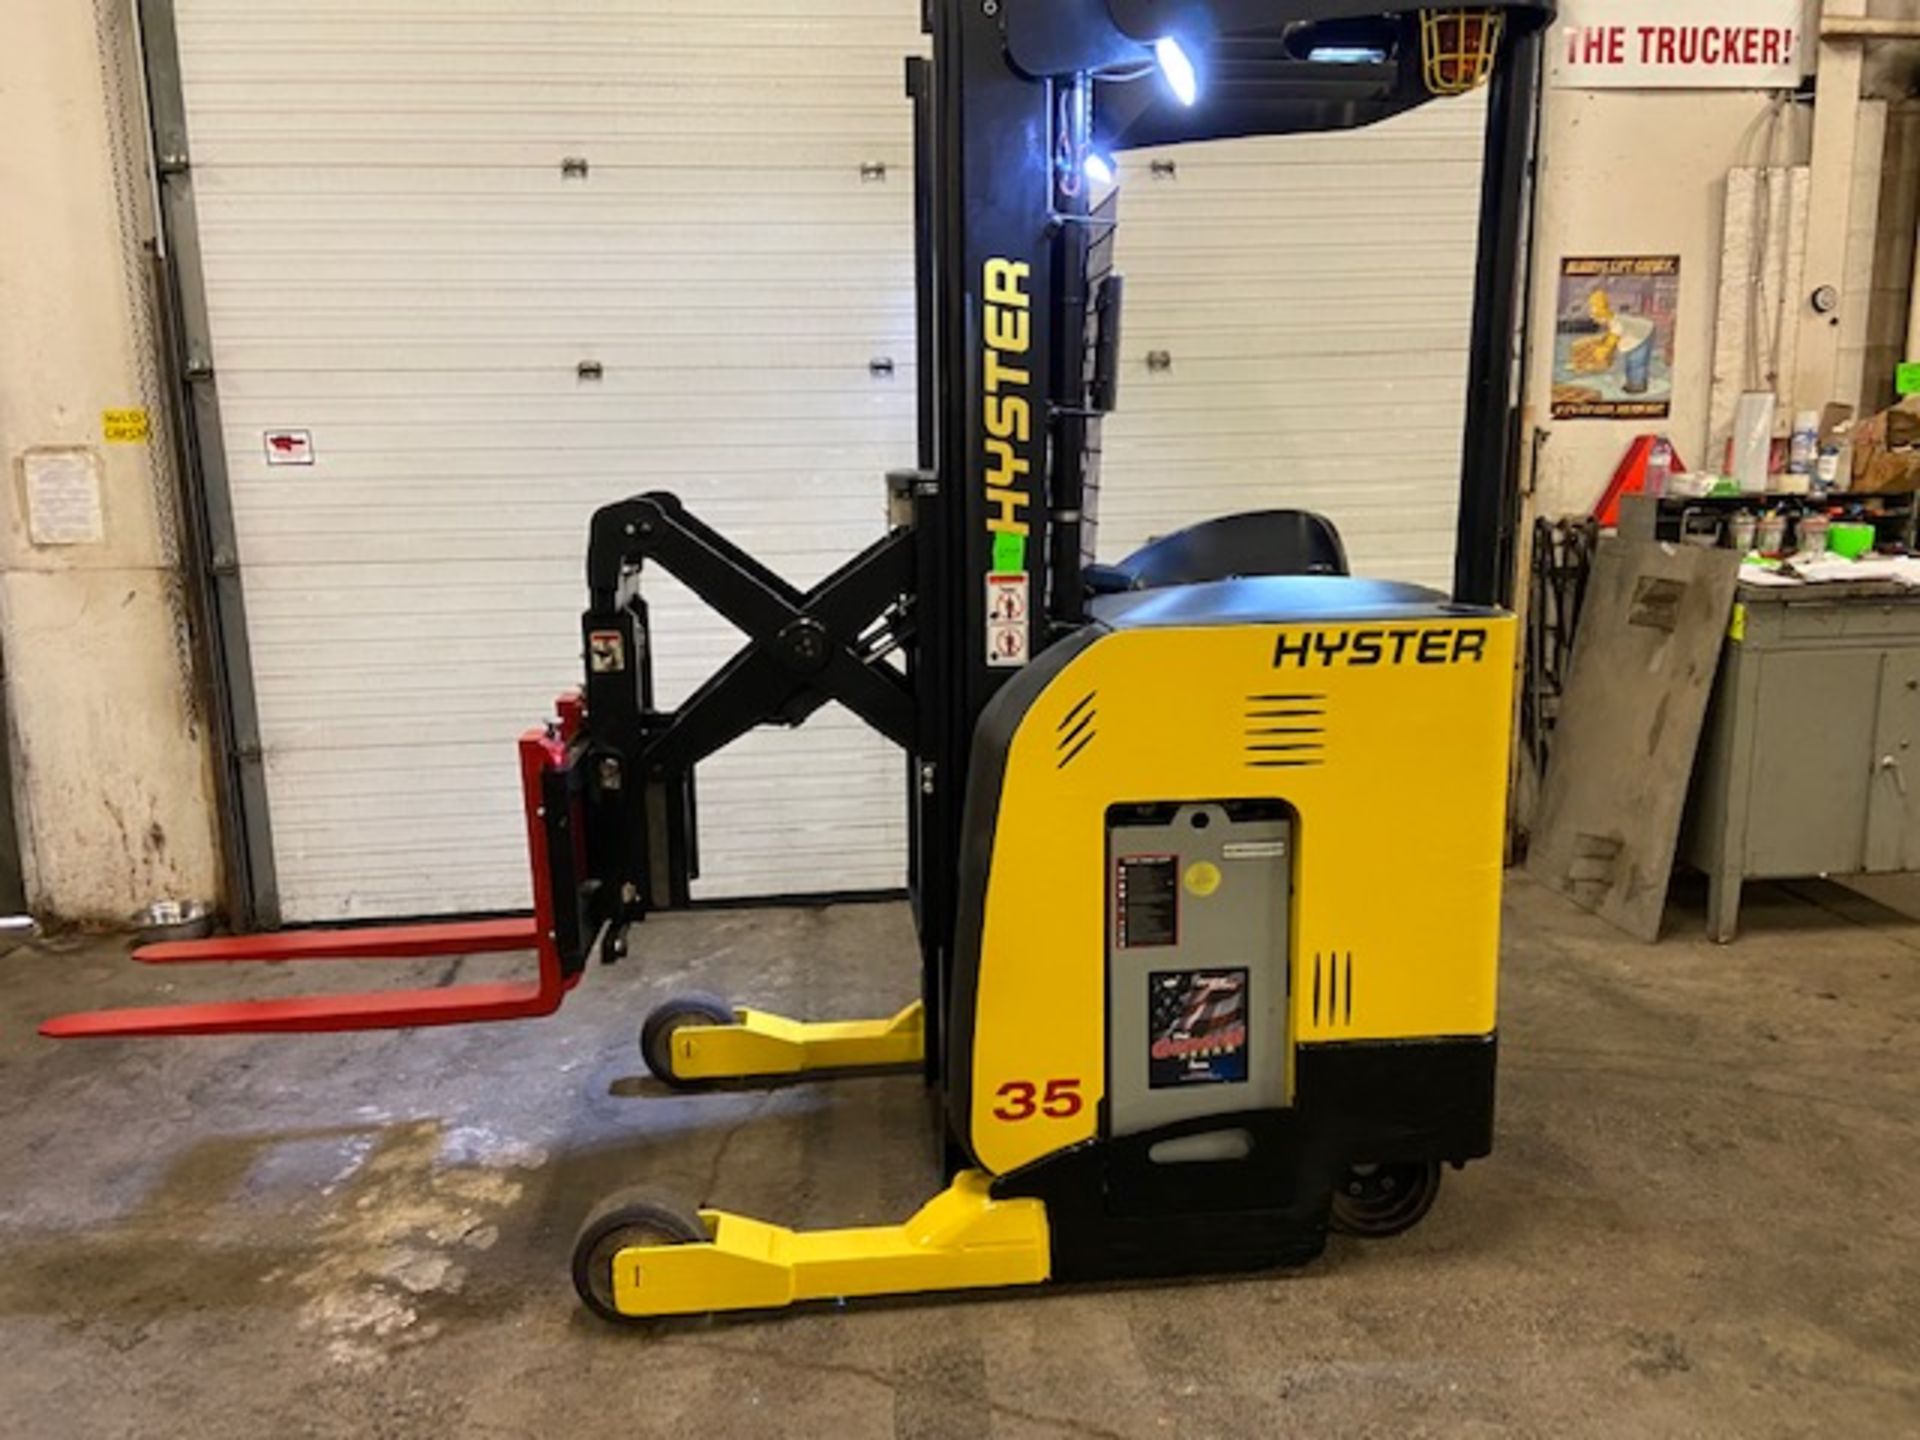 FREE CUSTOMS - 2012 Hyster Reach Truck Pallet Lifter REACH TRUCK electric 3500lbs & LOW HOURS